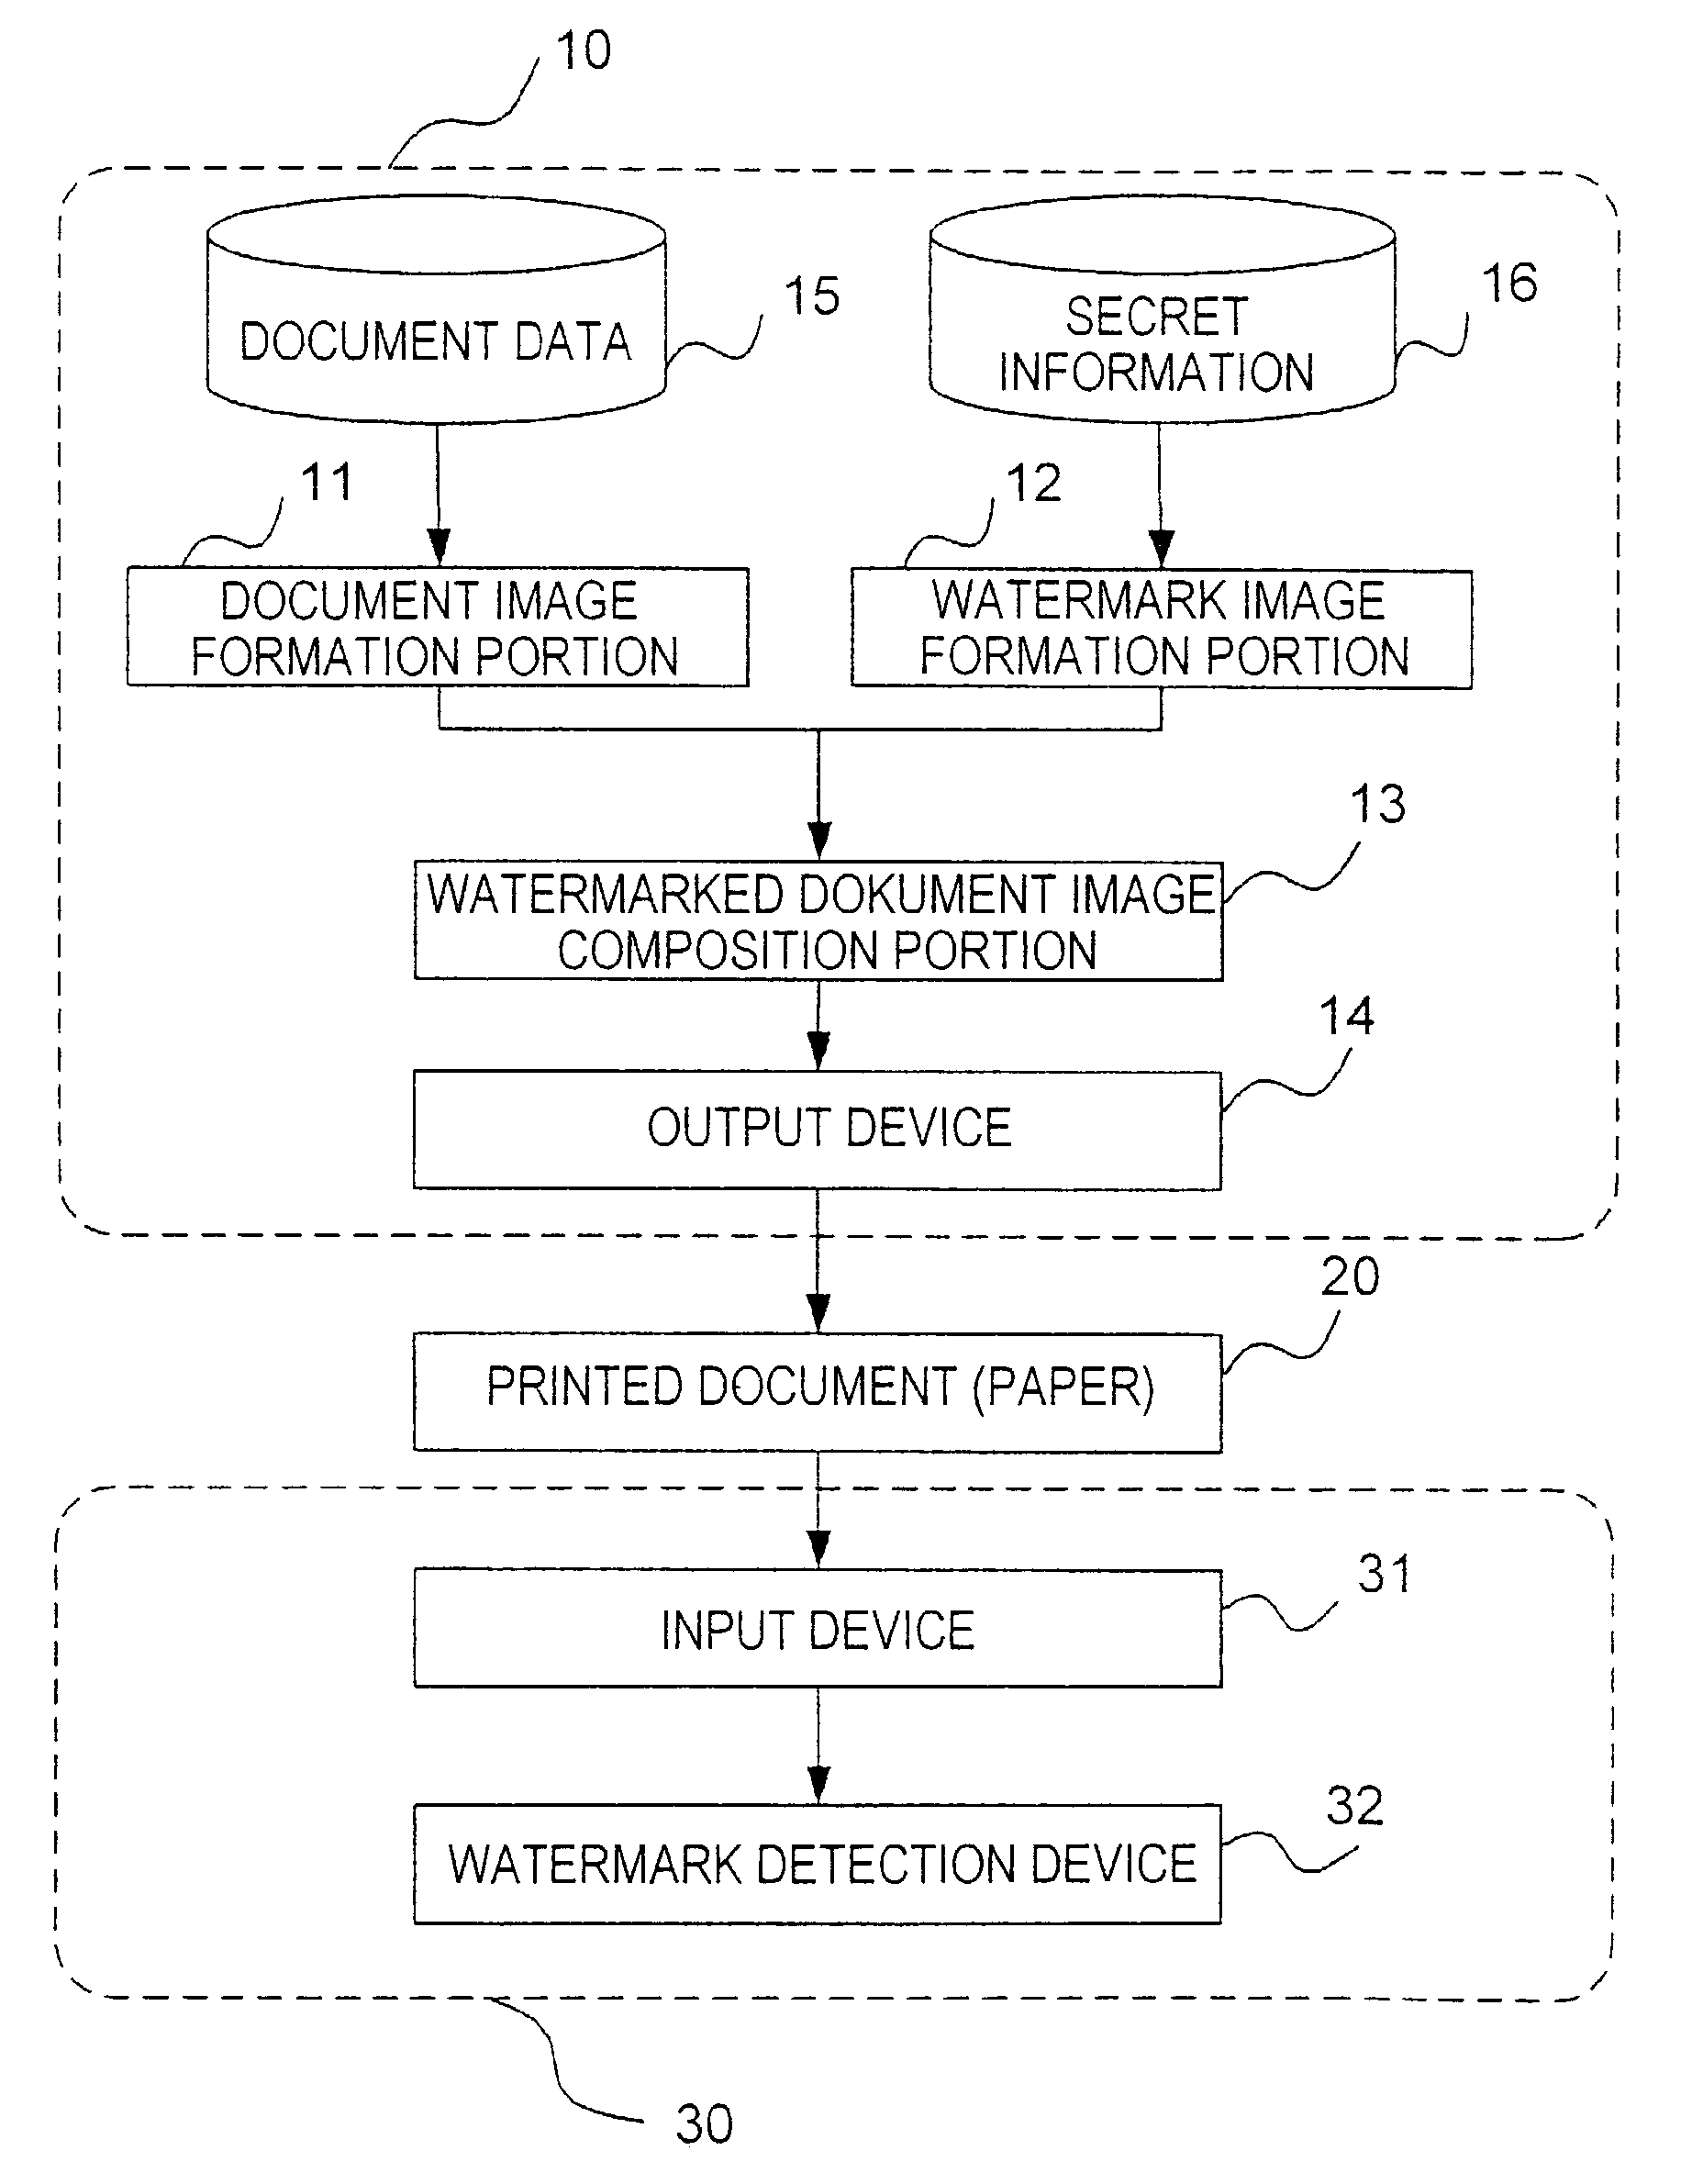 Watermark information embedment device and watermark information detection device